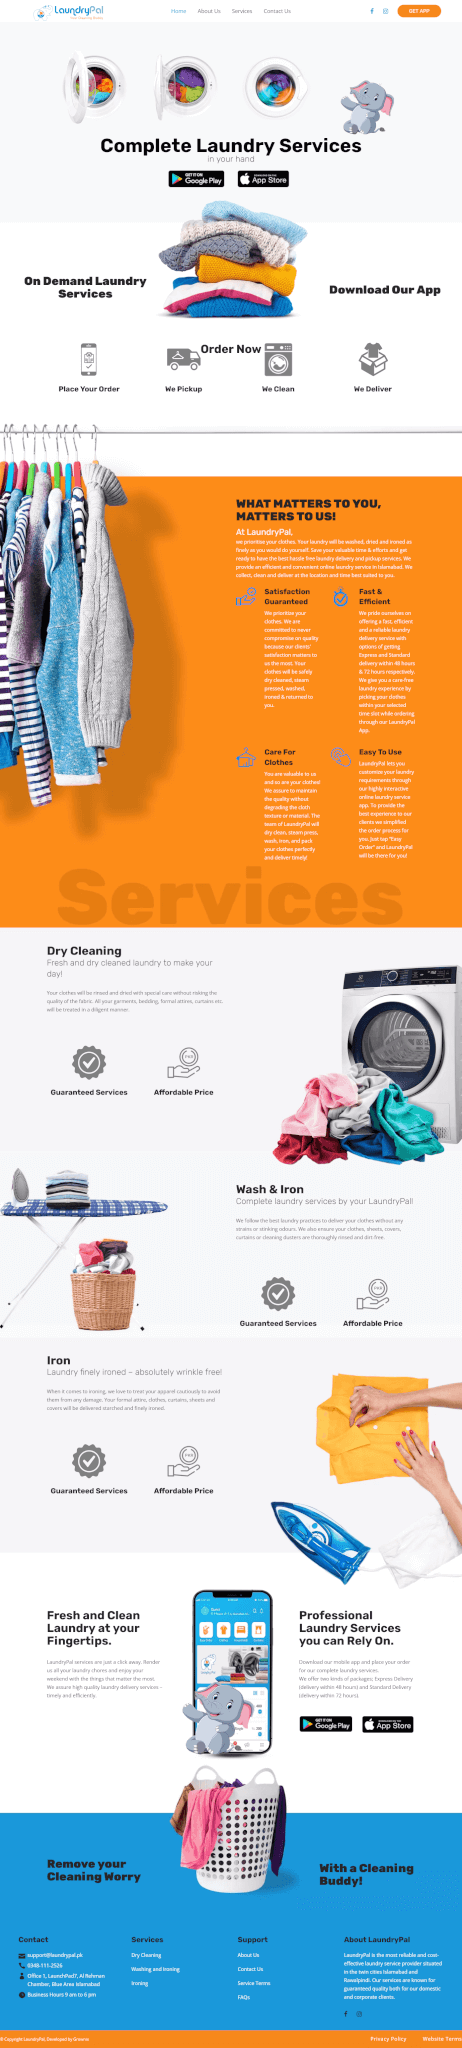 Complete Laundry Services In Islamabad Online LaundryPal-min